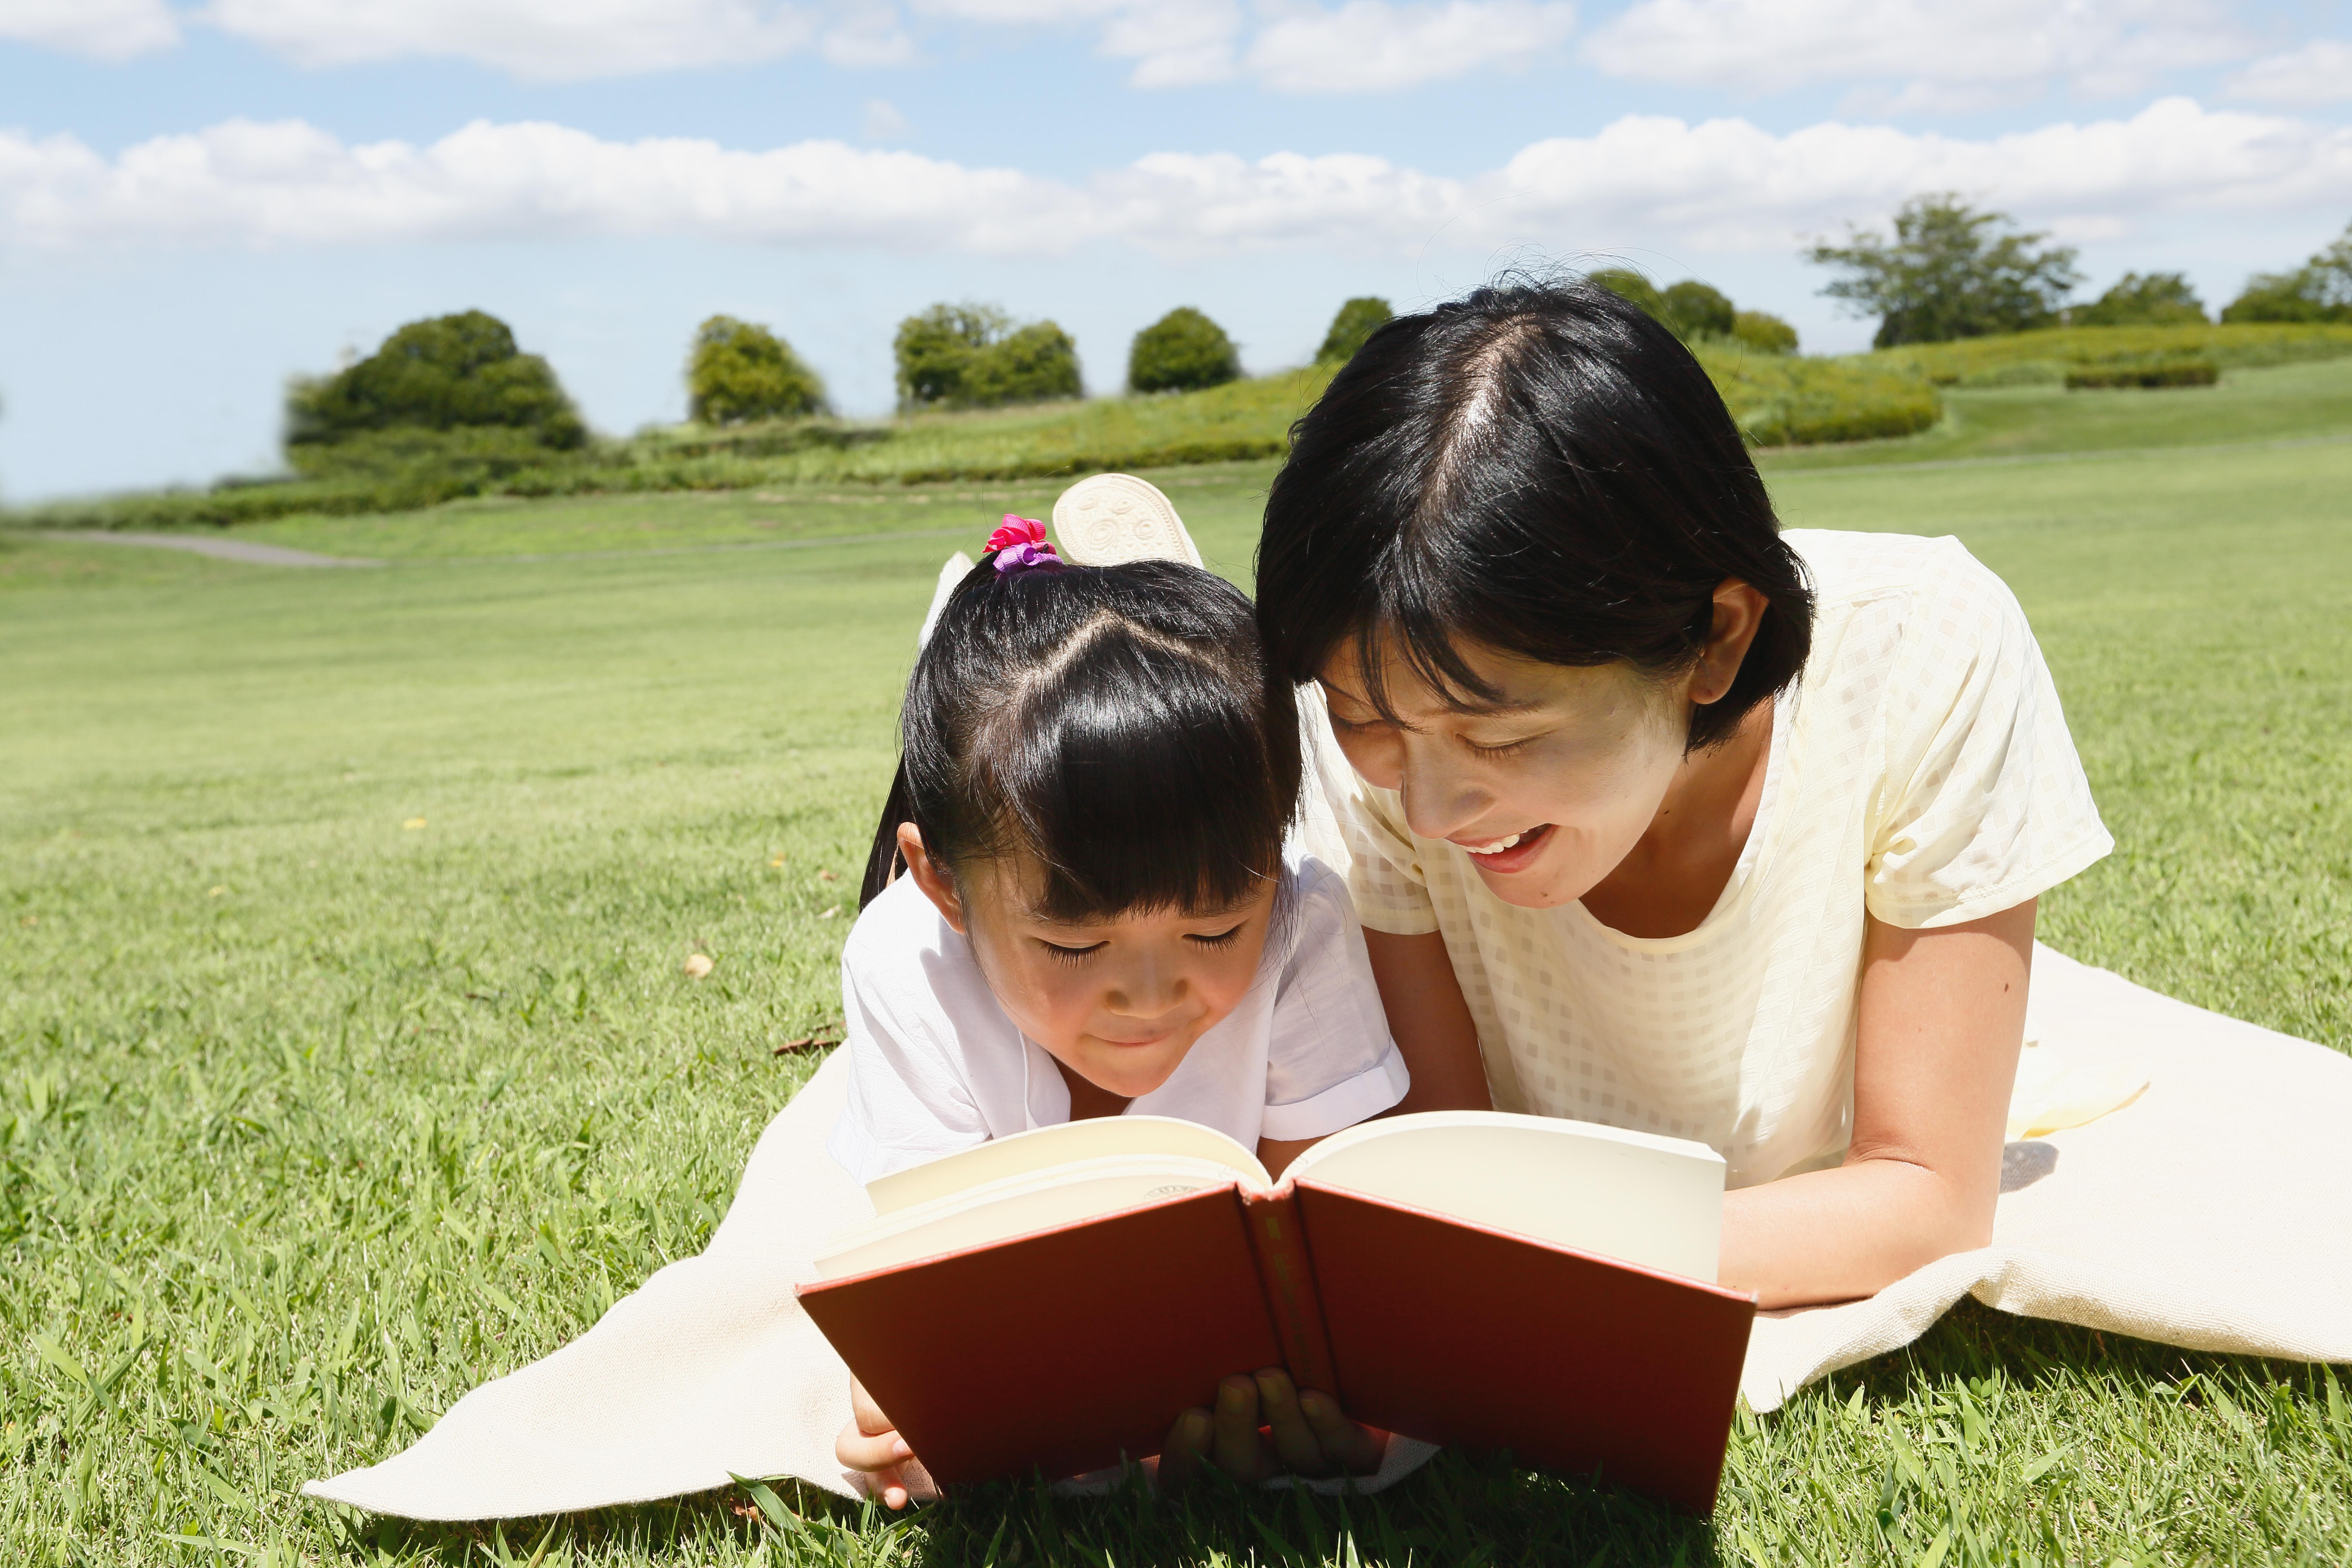 A parent in Hong Kong is worried her child is not reading challenging enough books. Photo: Alamy